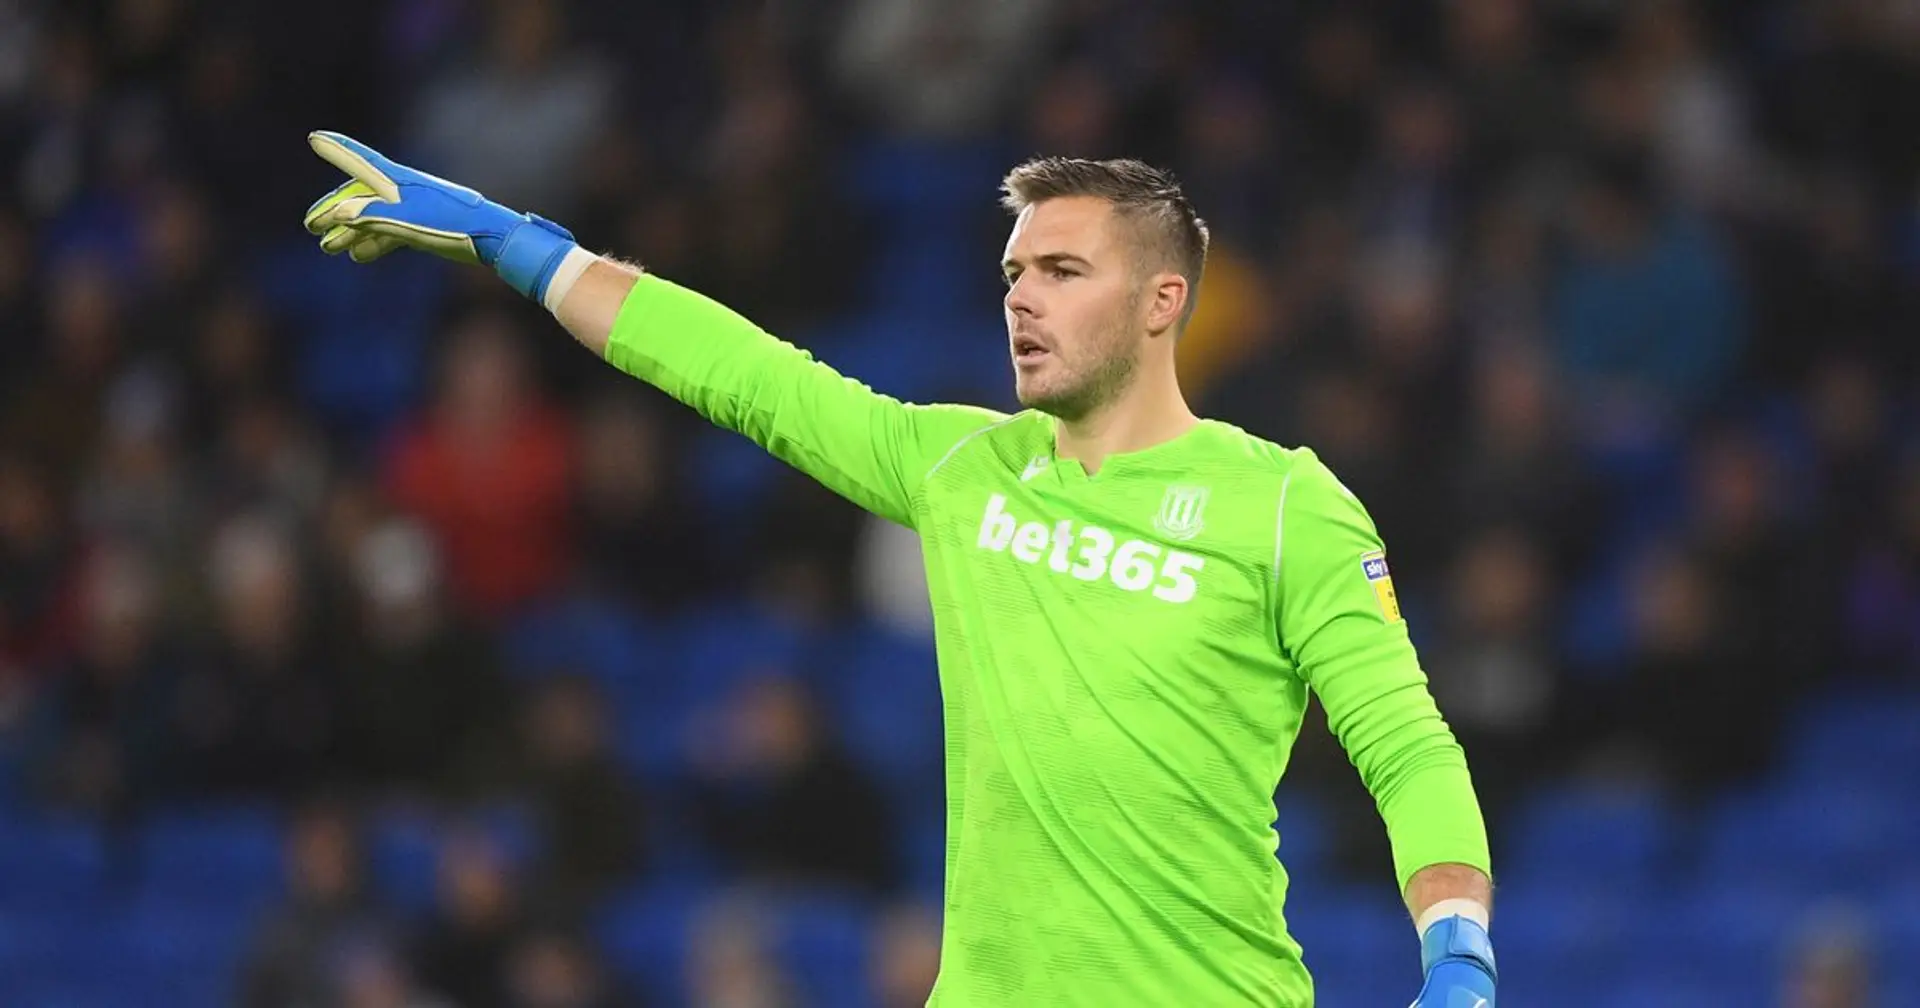 Downward spiral: why Liverpool should stay away from Jack Butland